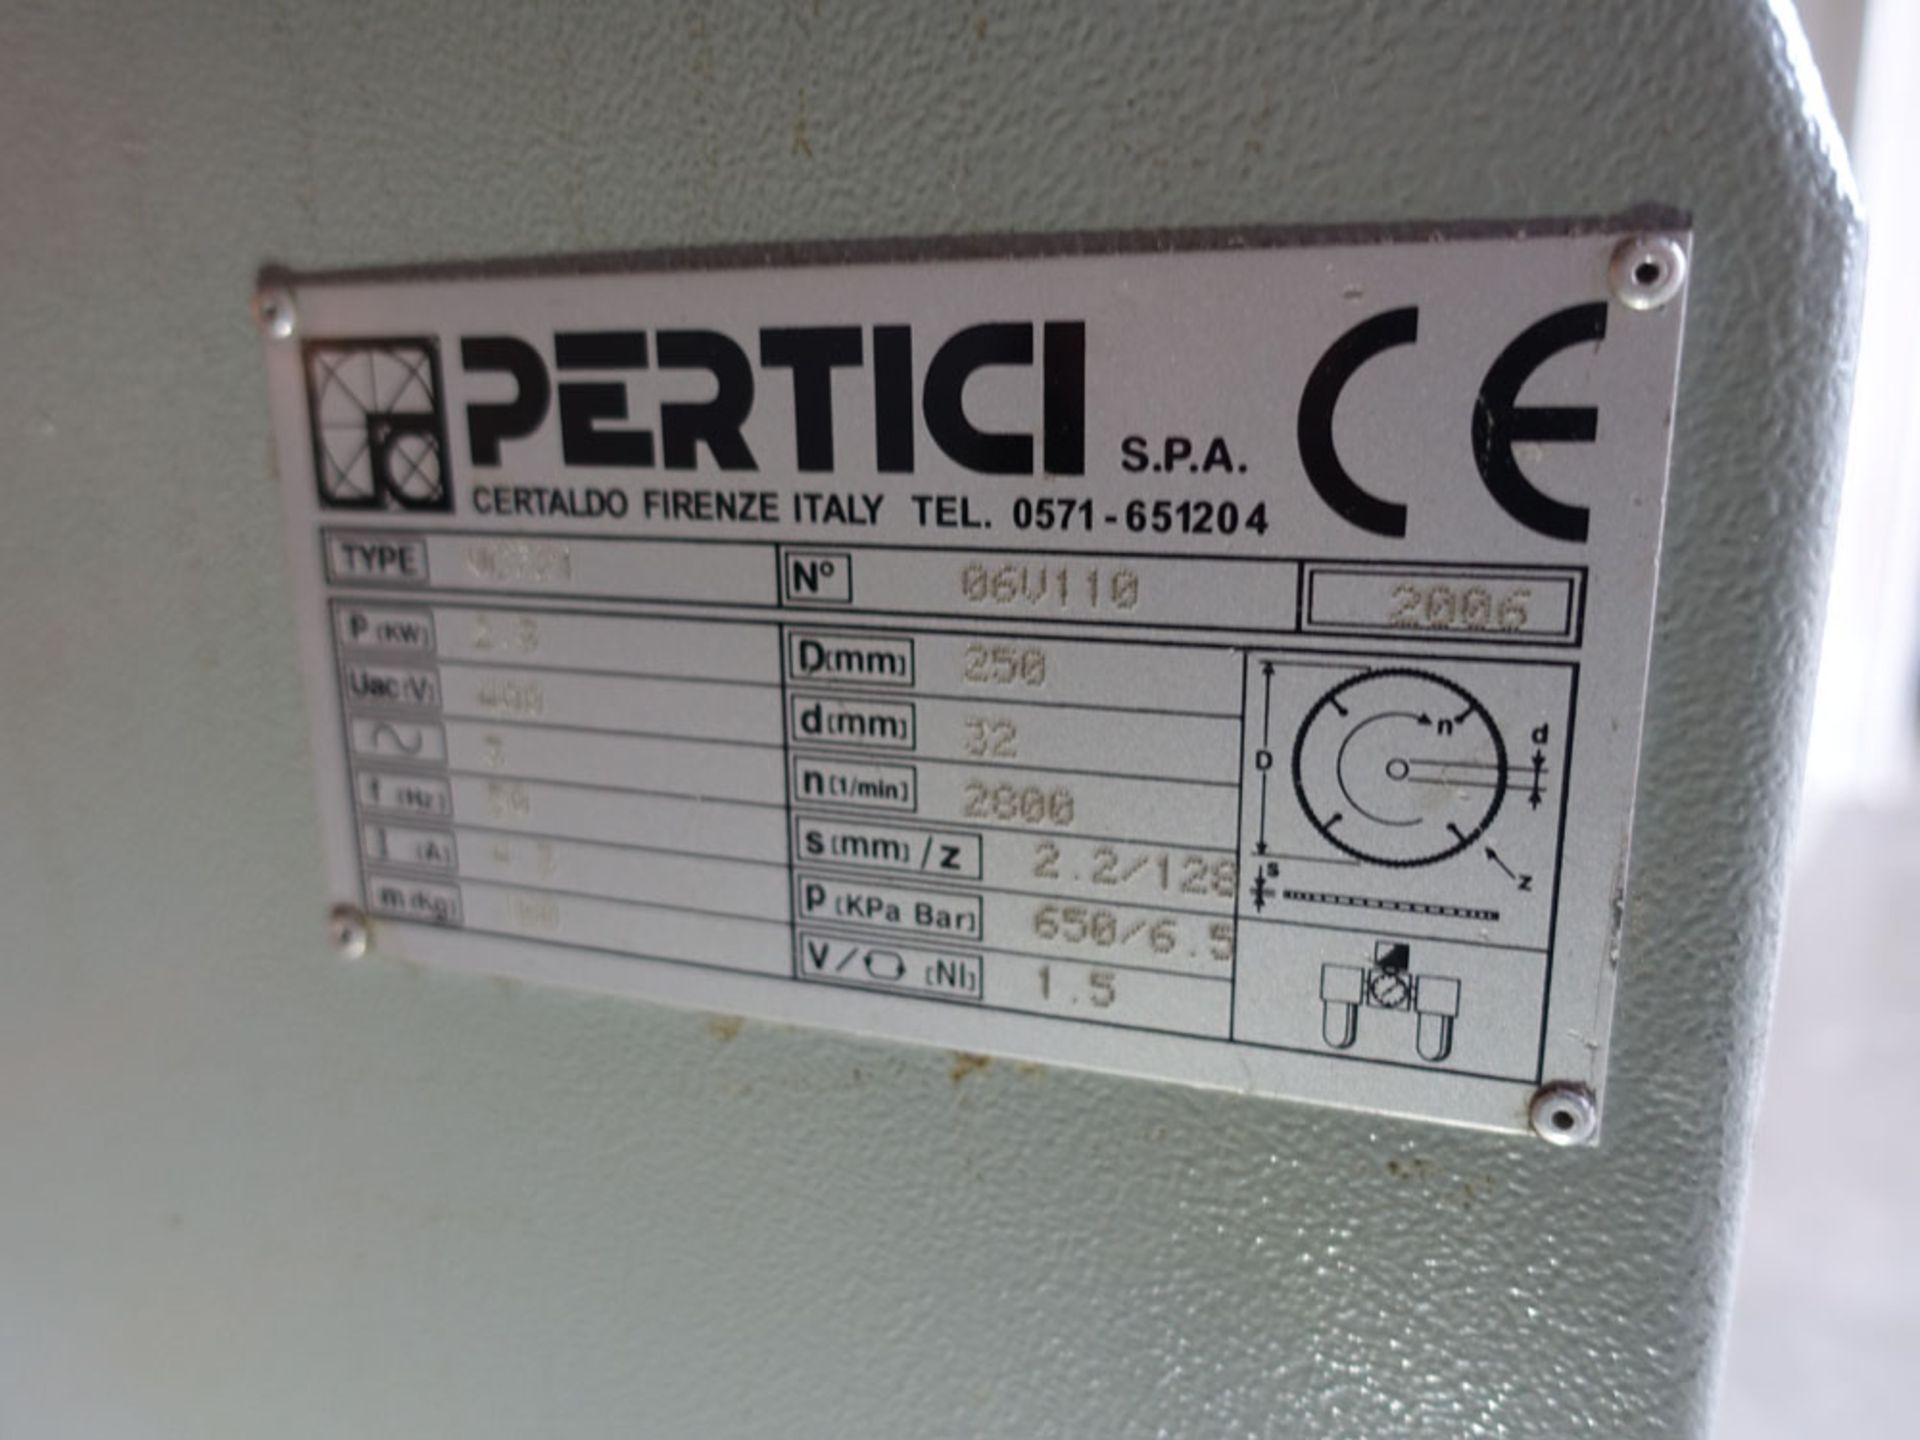 Pertici Univer model VC721 aluminium extrusion saw Serial number 06V110 Year 2006 - Image 7 of 7